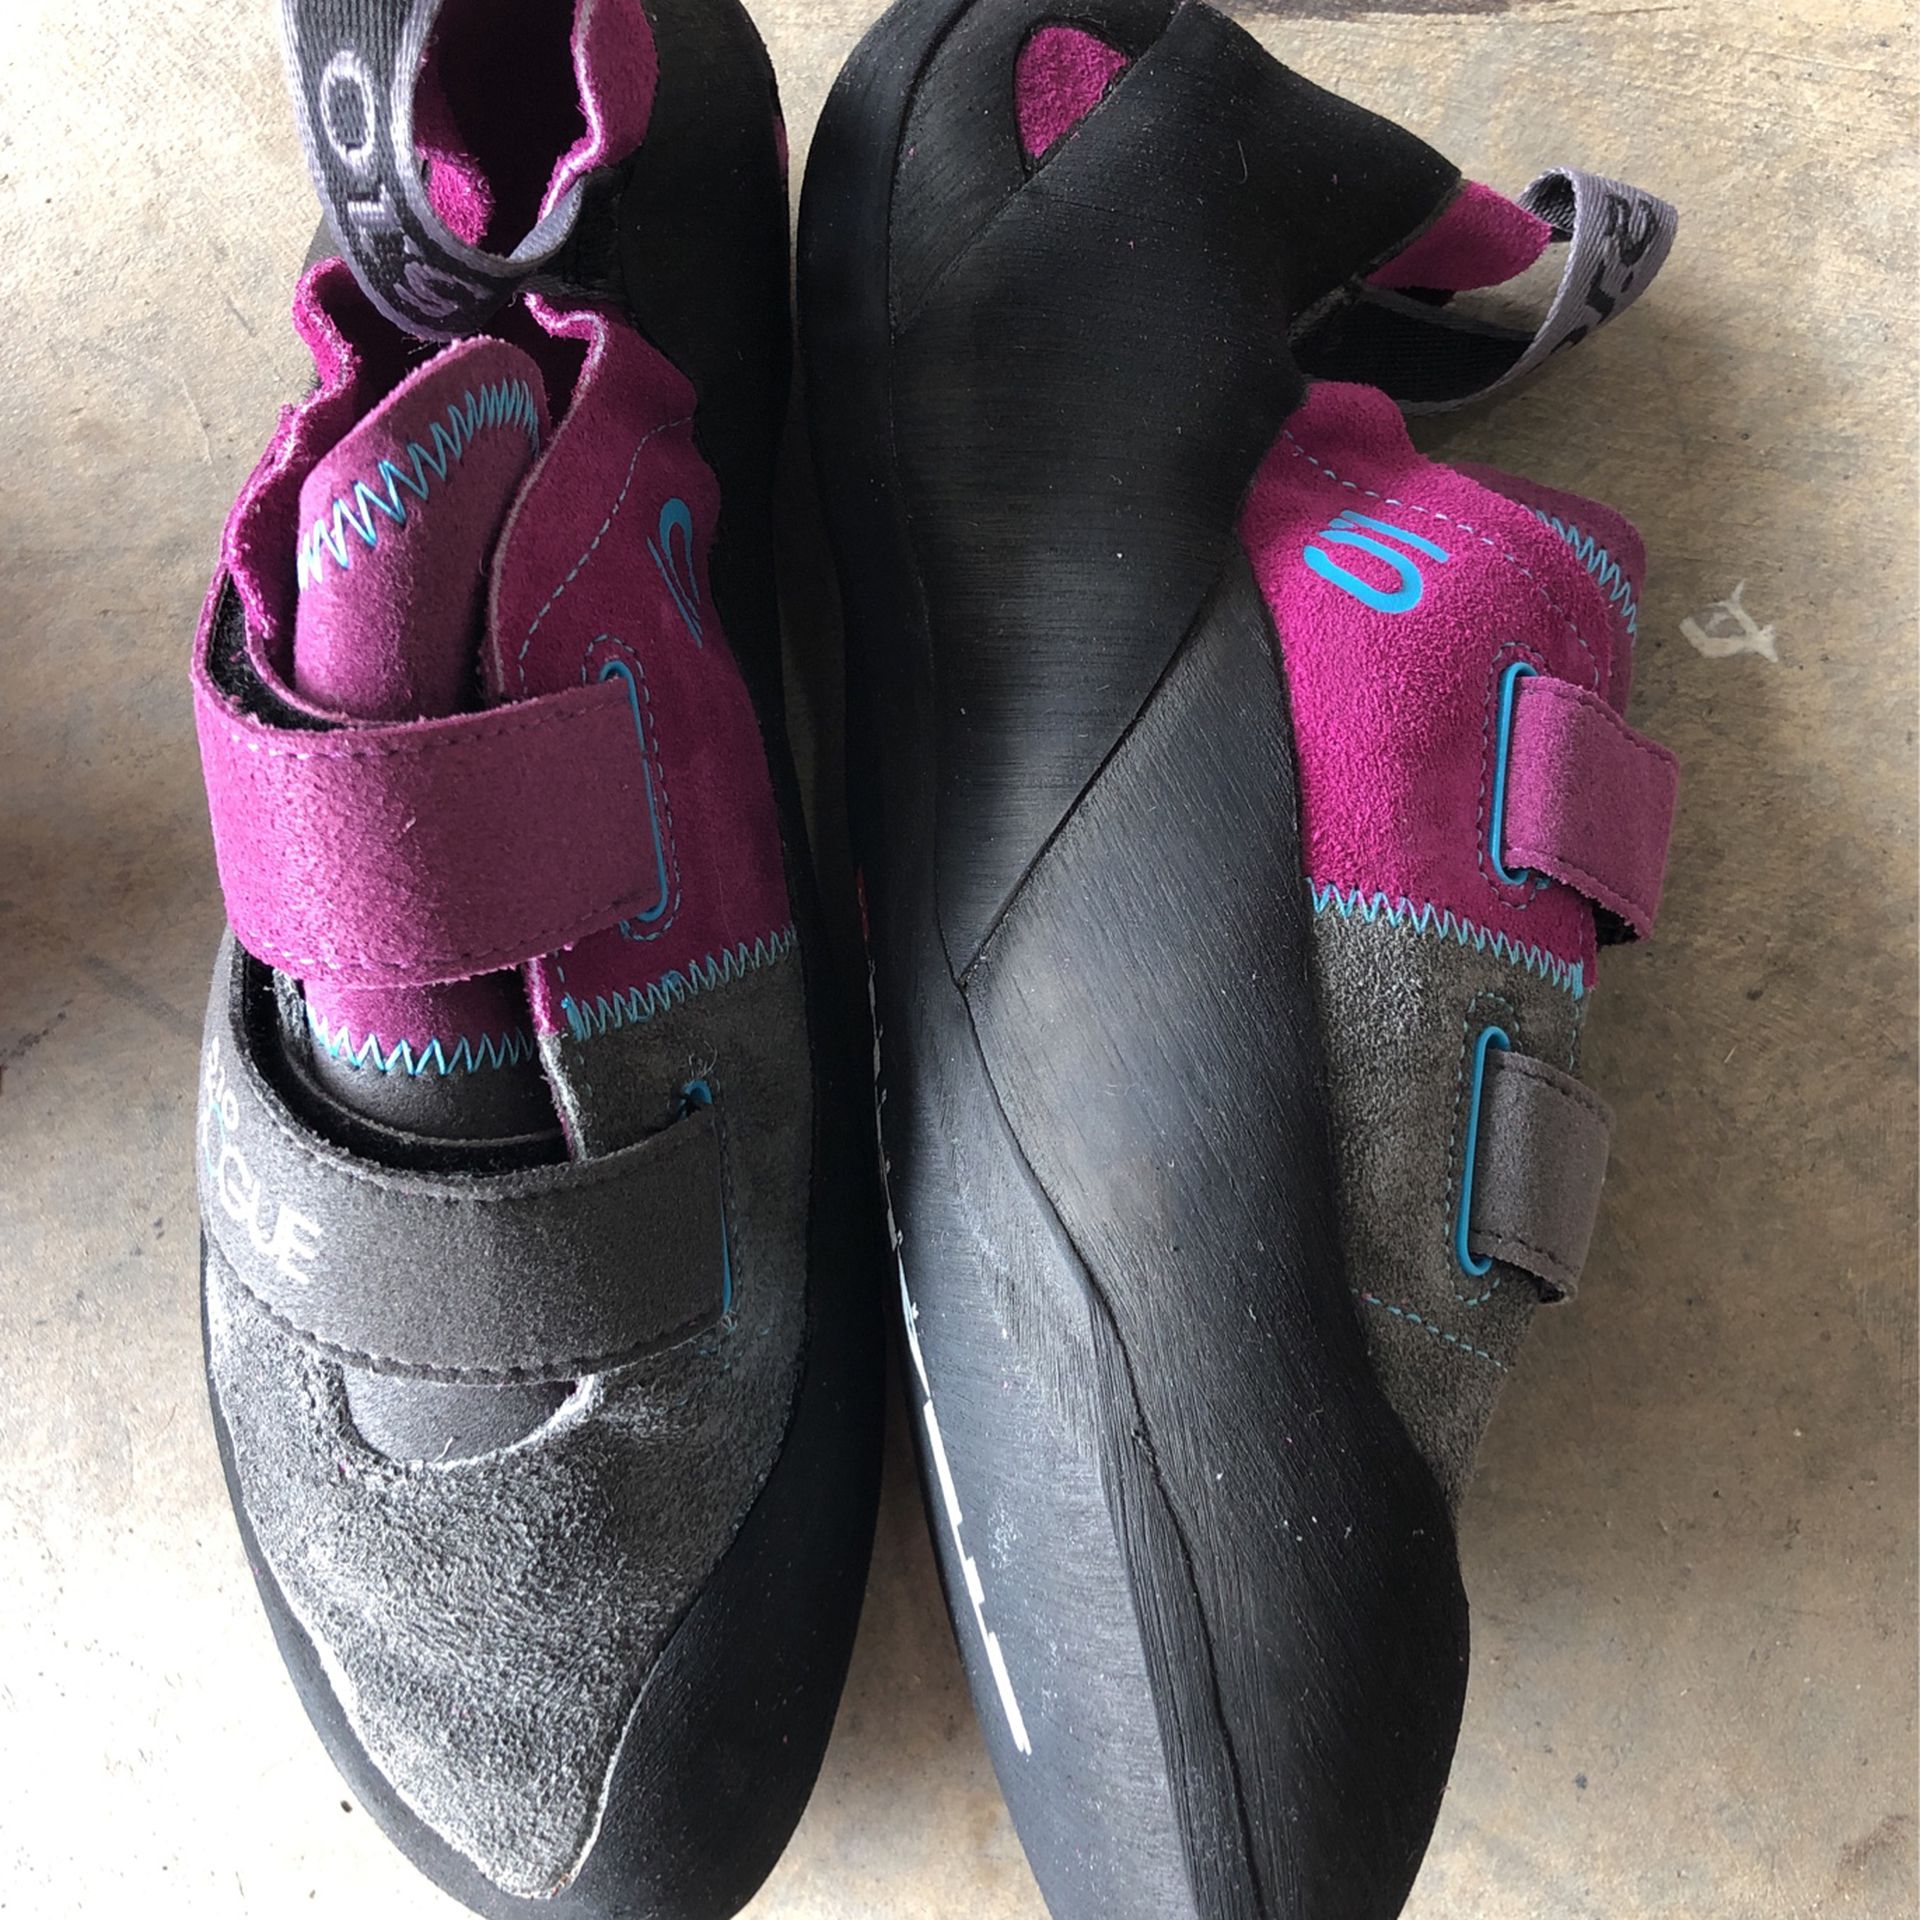 Black Diamond Zone LV Climbing Shoes for Sale in Los Angeles, CA - OfferUp